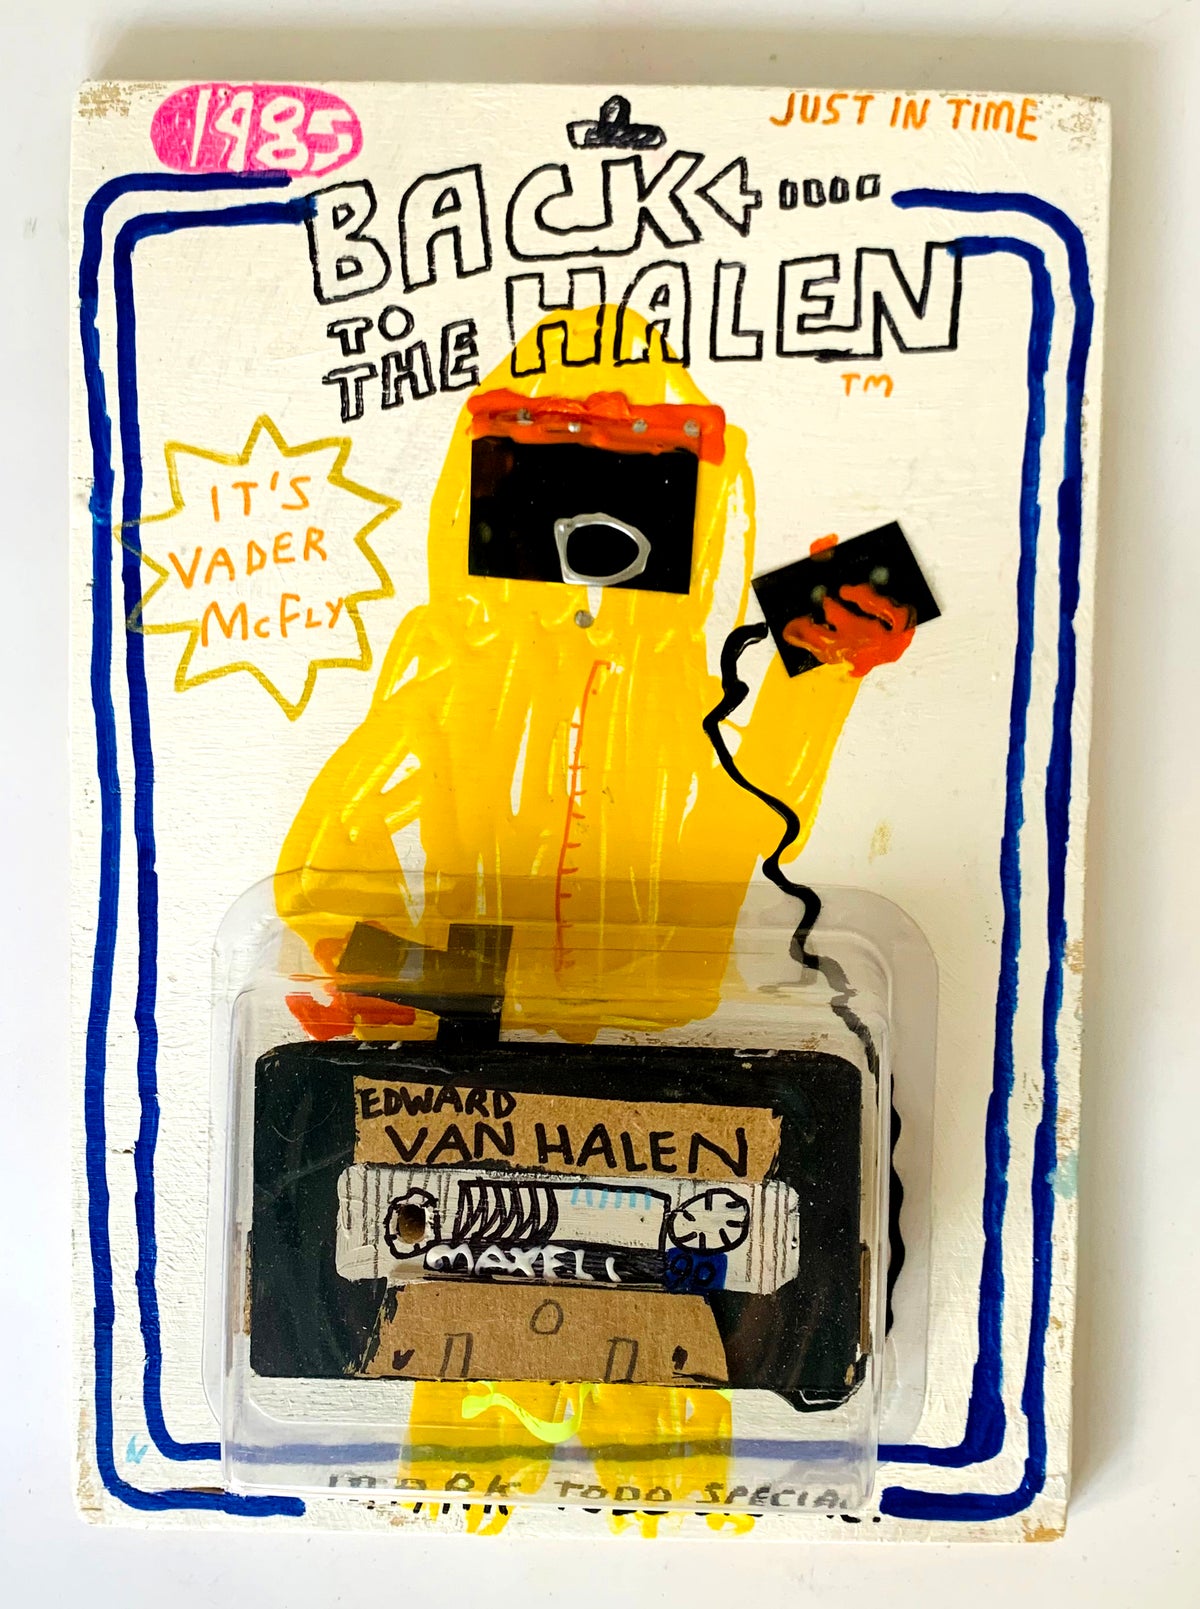 Mark Todd, Back to the Halen Figure, 2020 (two images total if can be included), Celebrating the 35th anniversary of Back to the Future and the life of Eddie Van Halen, this figure was available exclusively at D-Con 2020, Mixed media on birch plywood panel, 2-sided, 11 1.2” x 8" Limited, signed artist proof